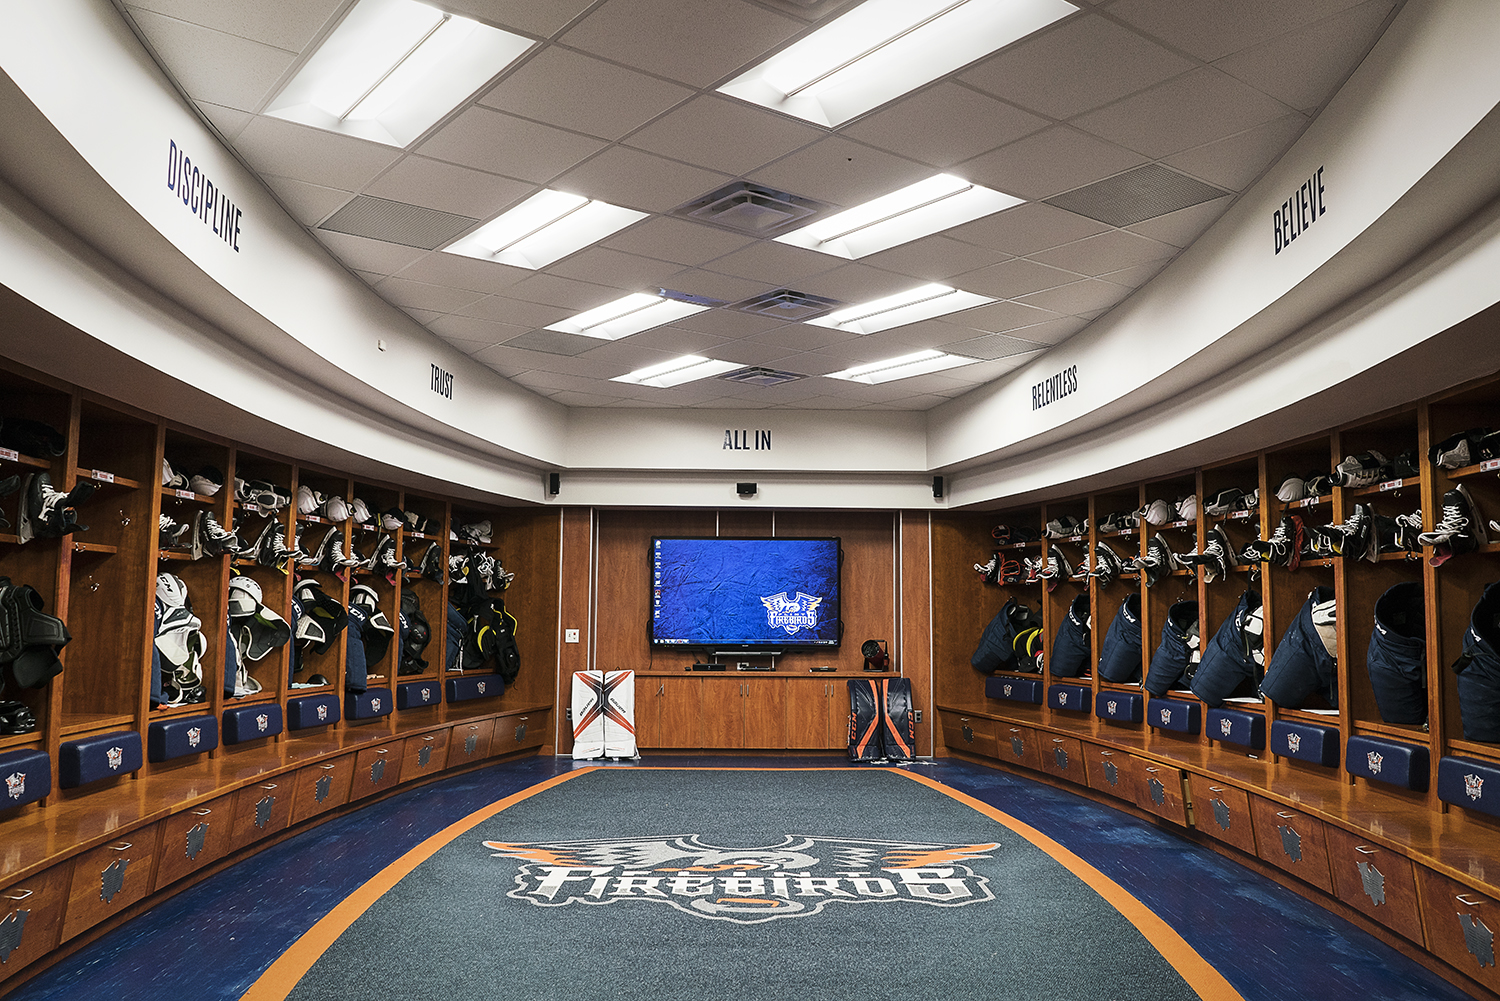 Flint, MI - Tuesday, January 30, 2018: The updated, pro-style Flint Firebirds locker room boasts a fully equipped strength and conditioning facility, theater for viewing film and lounge for the players at the Dort Federal Event Center.